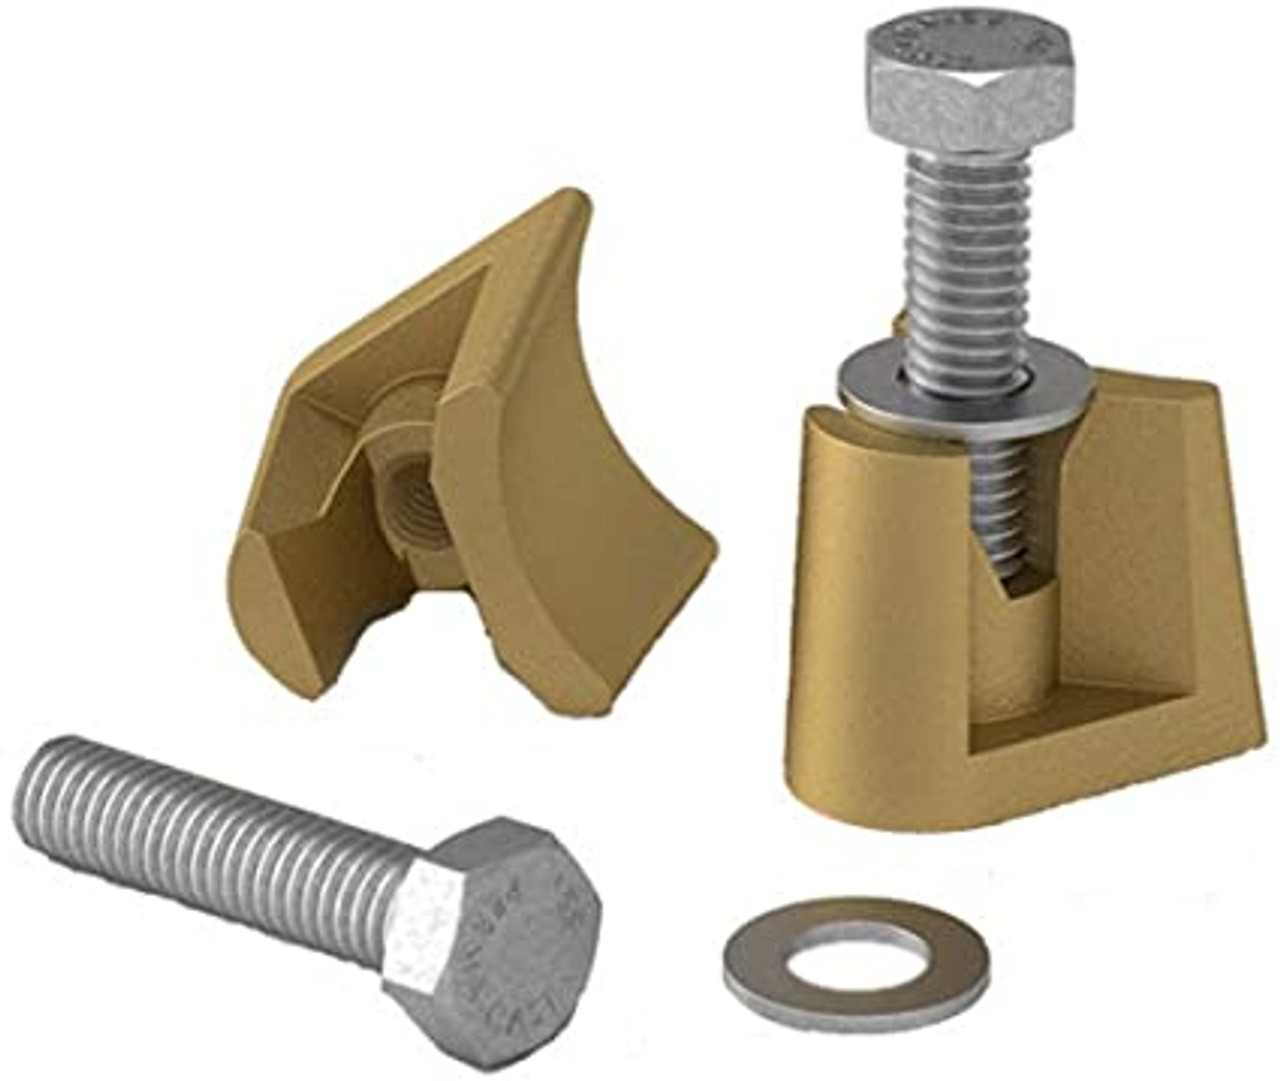 Permacast PW Wedge Assembly with Washer and 1-1/2 Inch Bolt For Perma Sockets